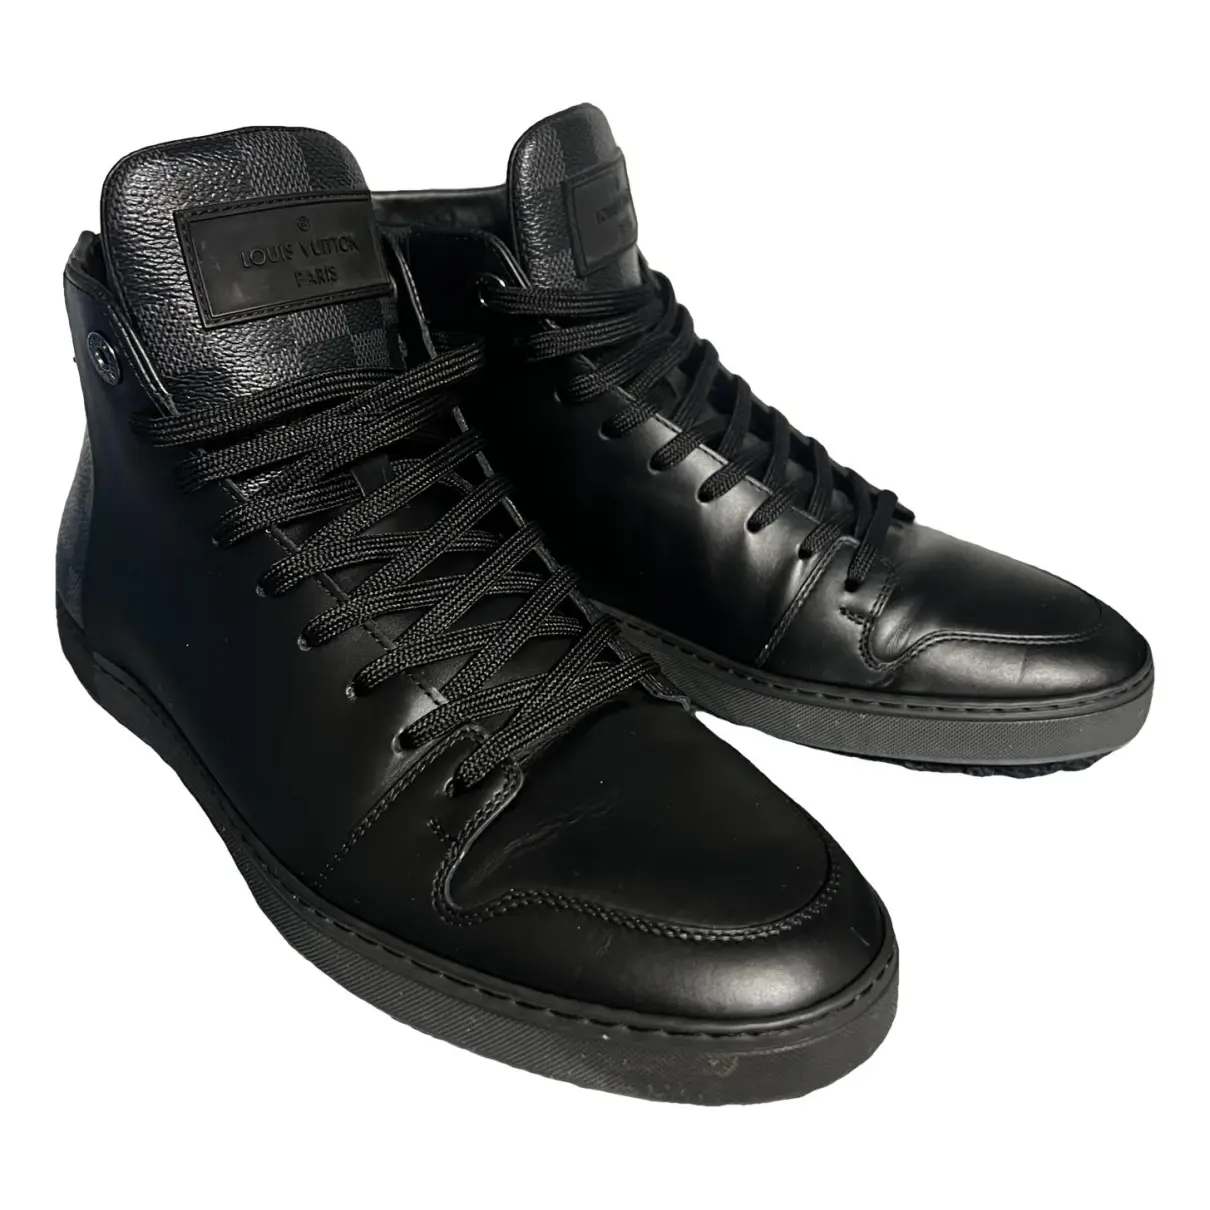 Trainer Sneaker Boot High patent leather high trainers